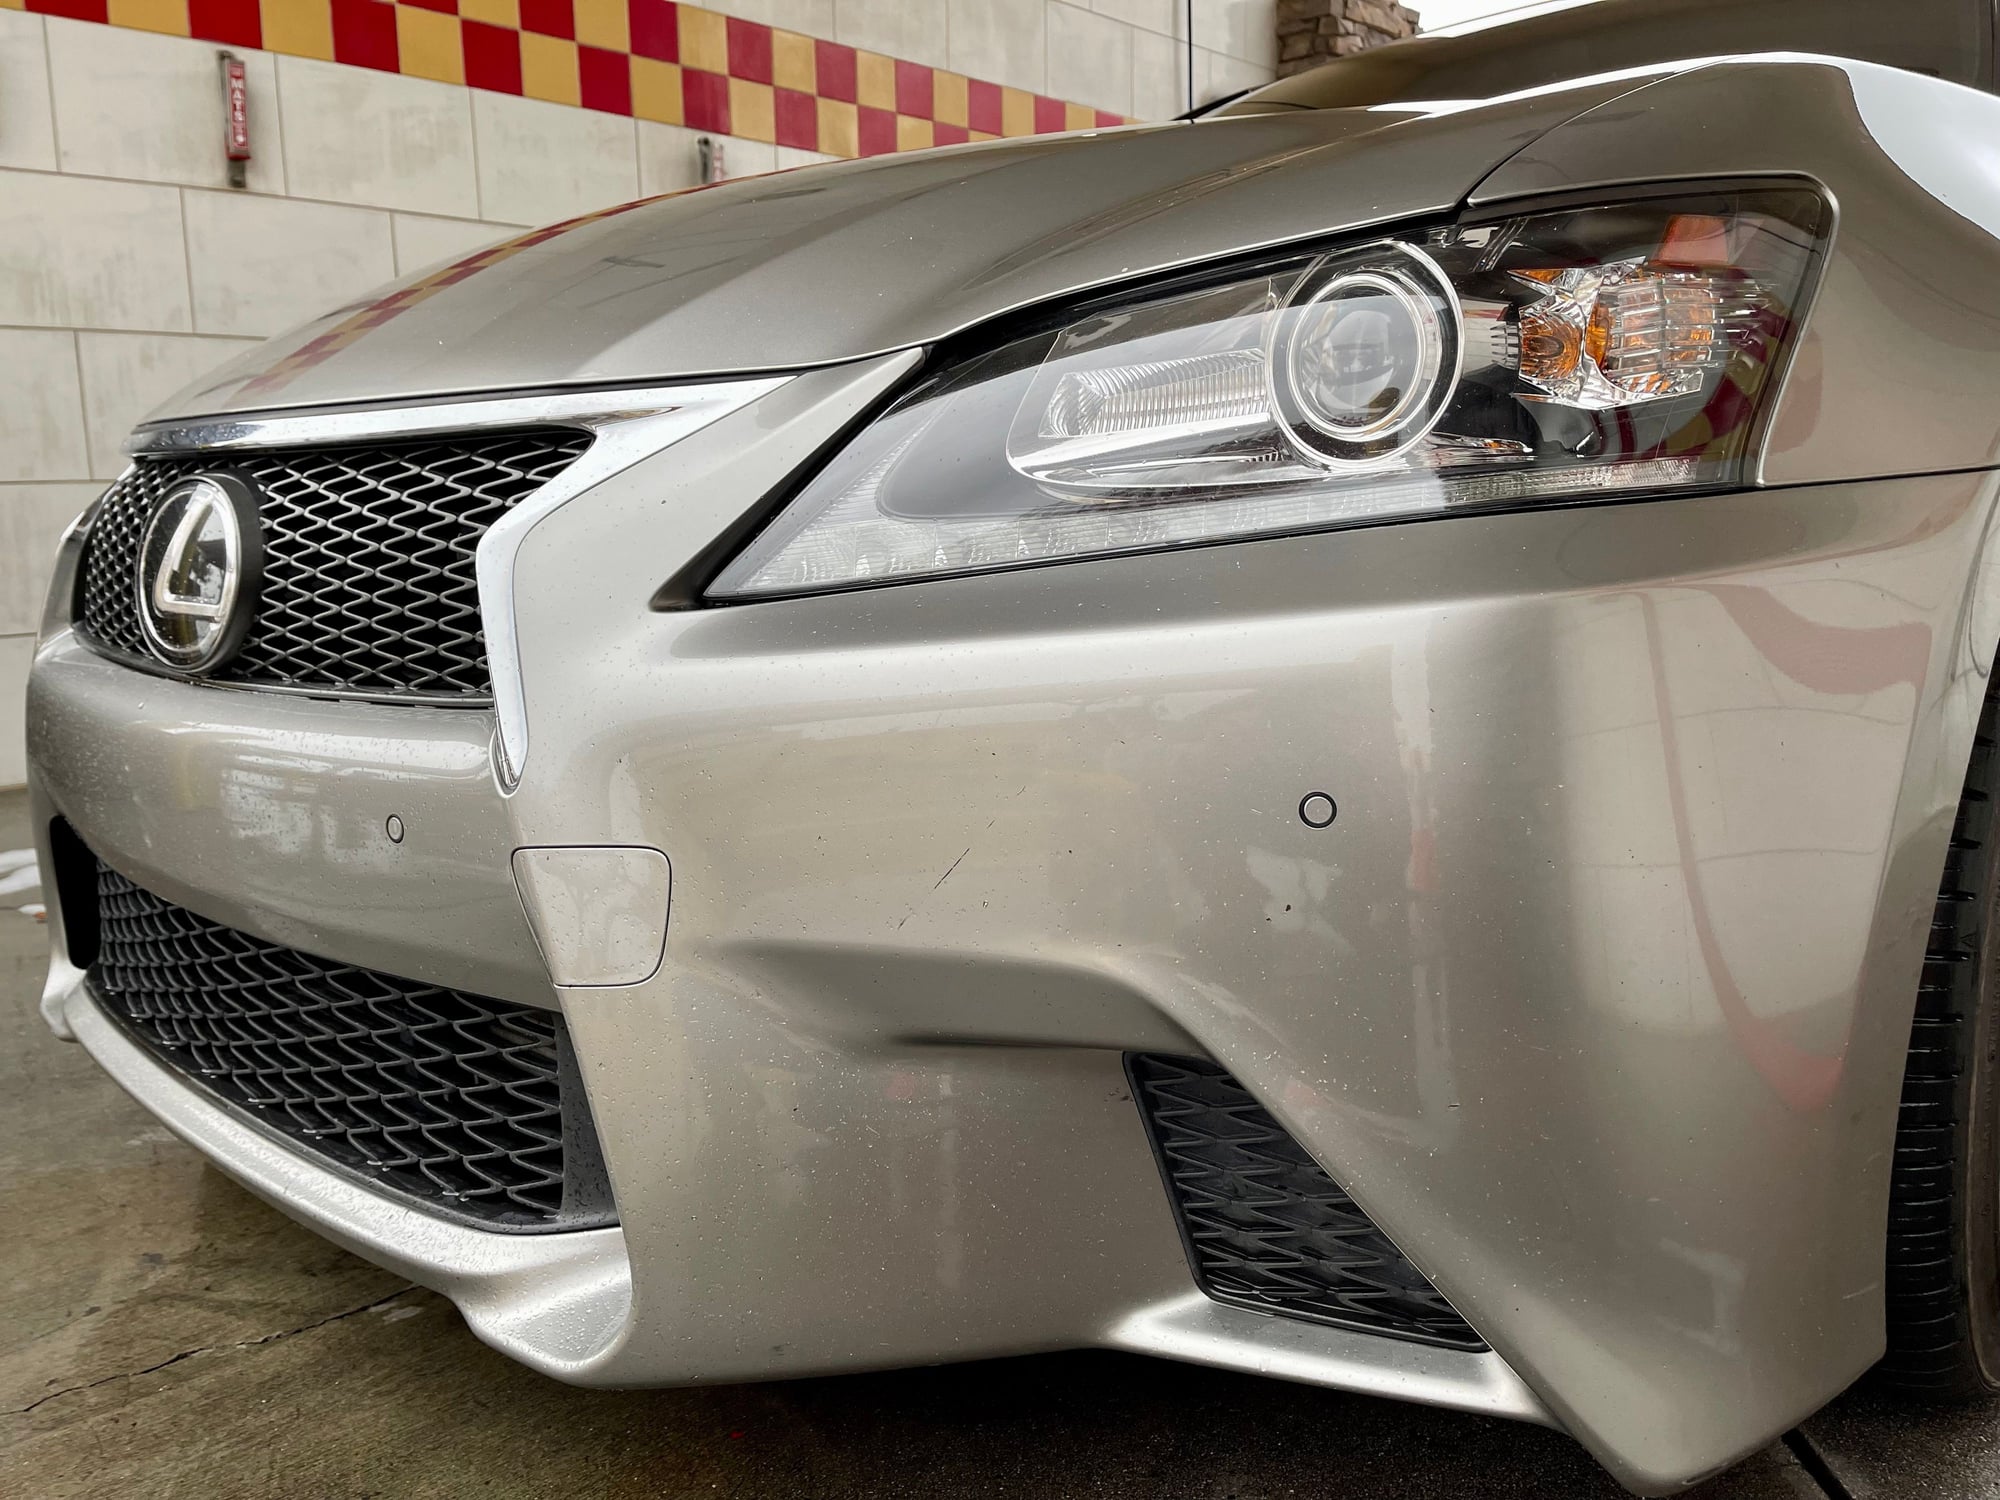 2015 Lexus GS350 - 2015 Lexus GS 350 F Sport Stage 3 RR Supercharger, BC Coilovers w/Swift Springs and - Used - VIN JTHBE1BL8FA004077 - 67,200 Miles - 6 cyl - 2WD - Automatic - Sedan - Silver - Riverside, CA 92505, United States